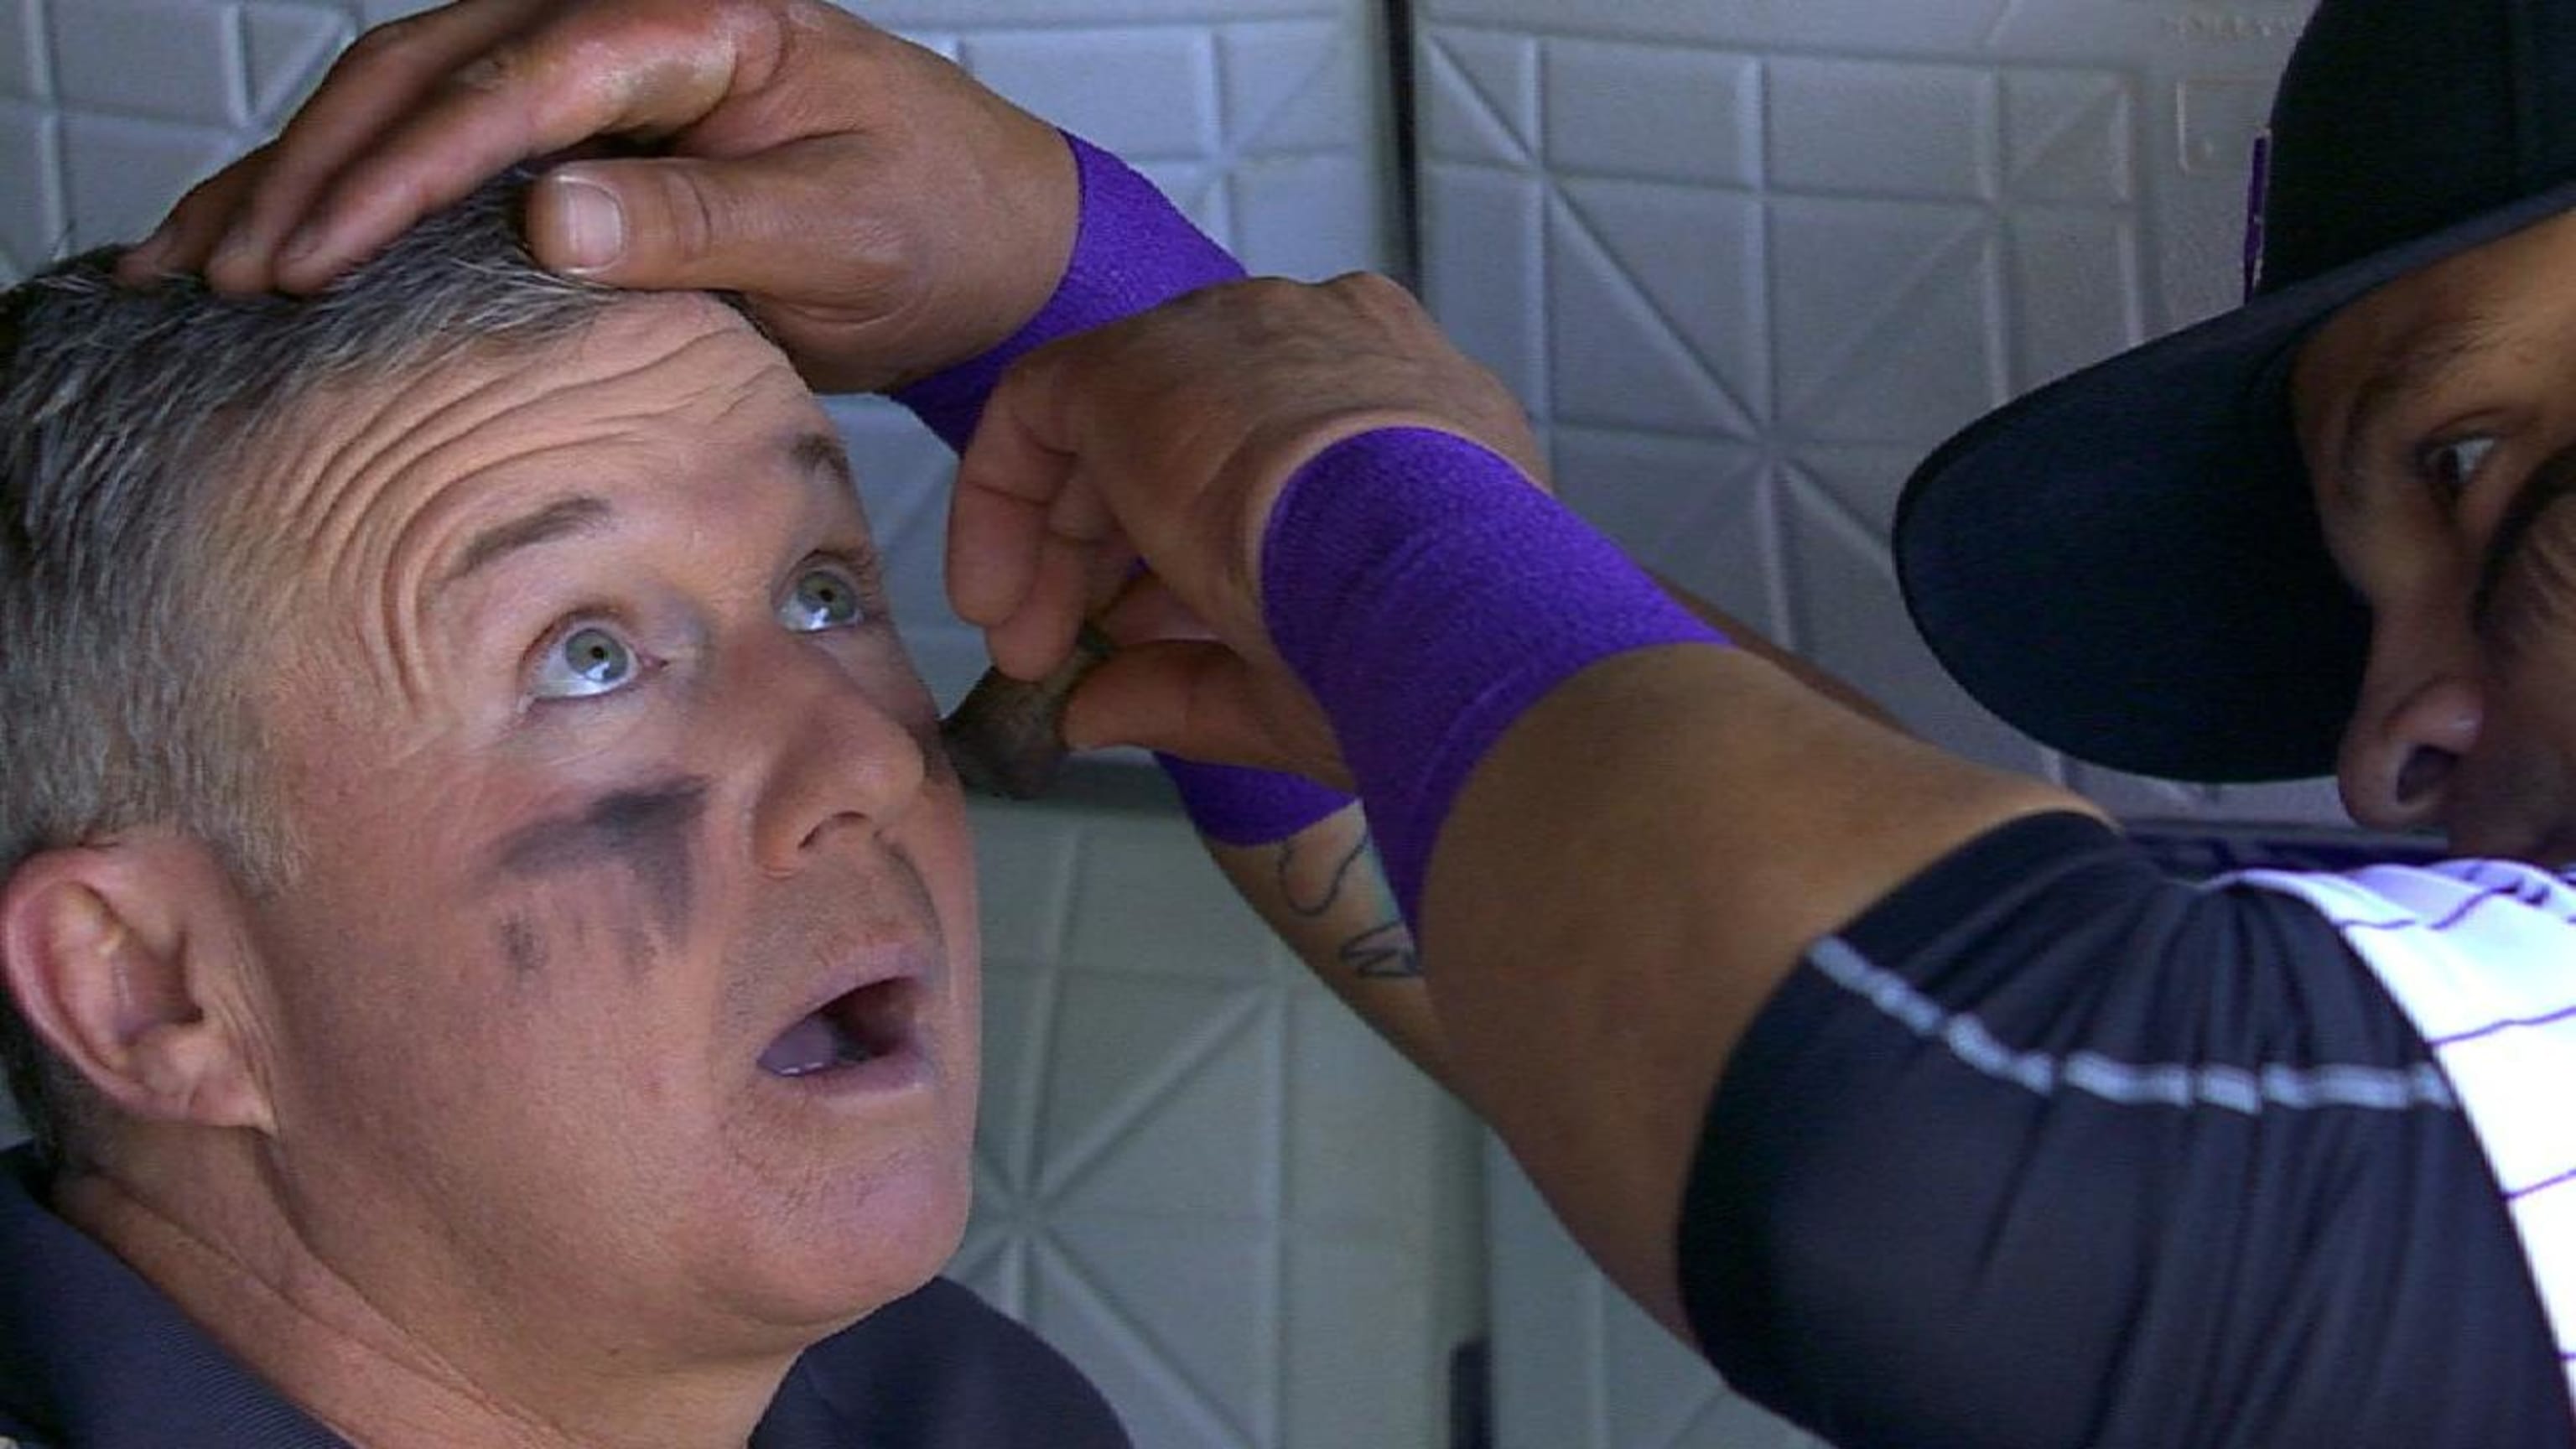 Gerardo Parra gave a sideline reporter a makeup lesson with some